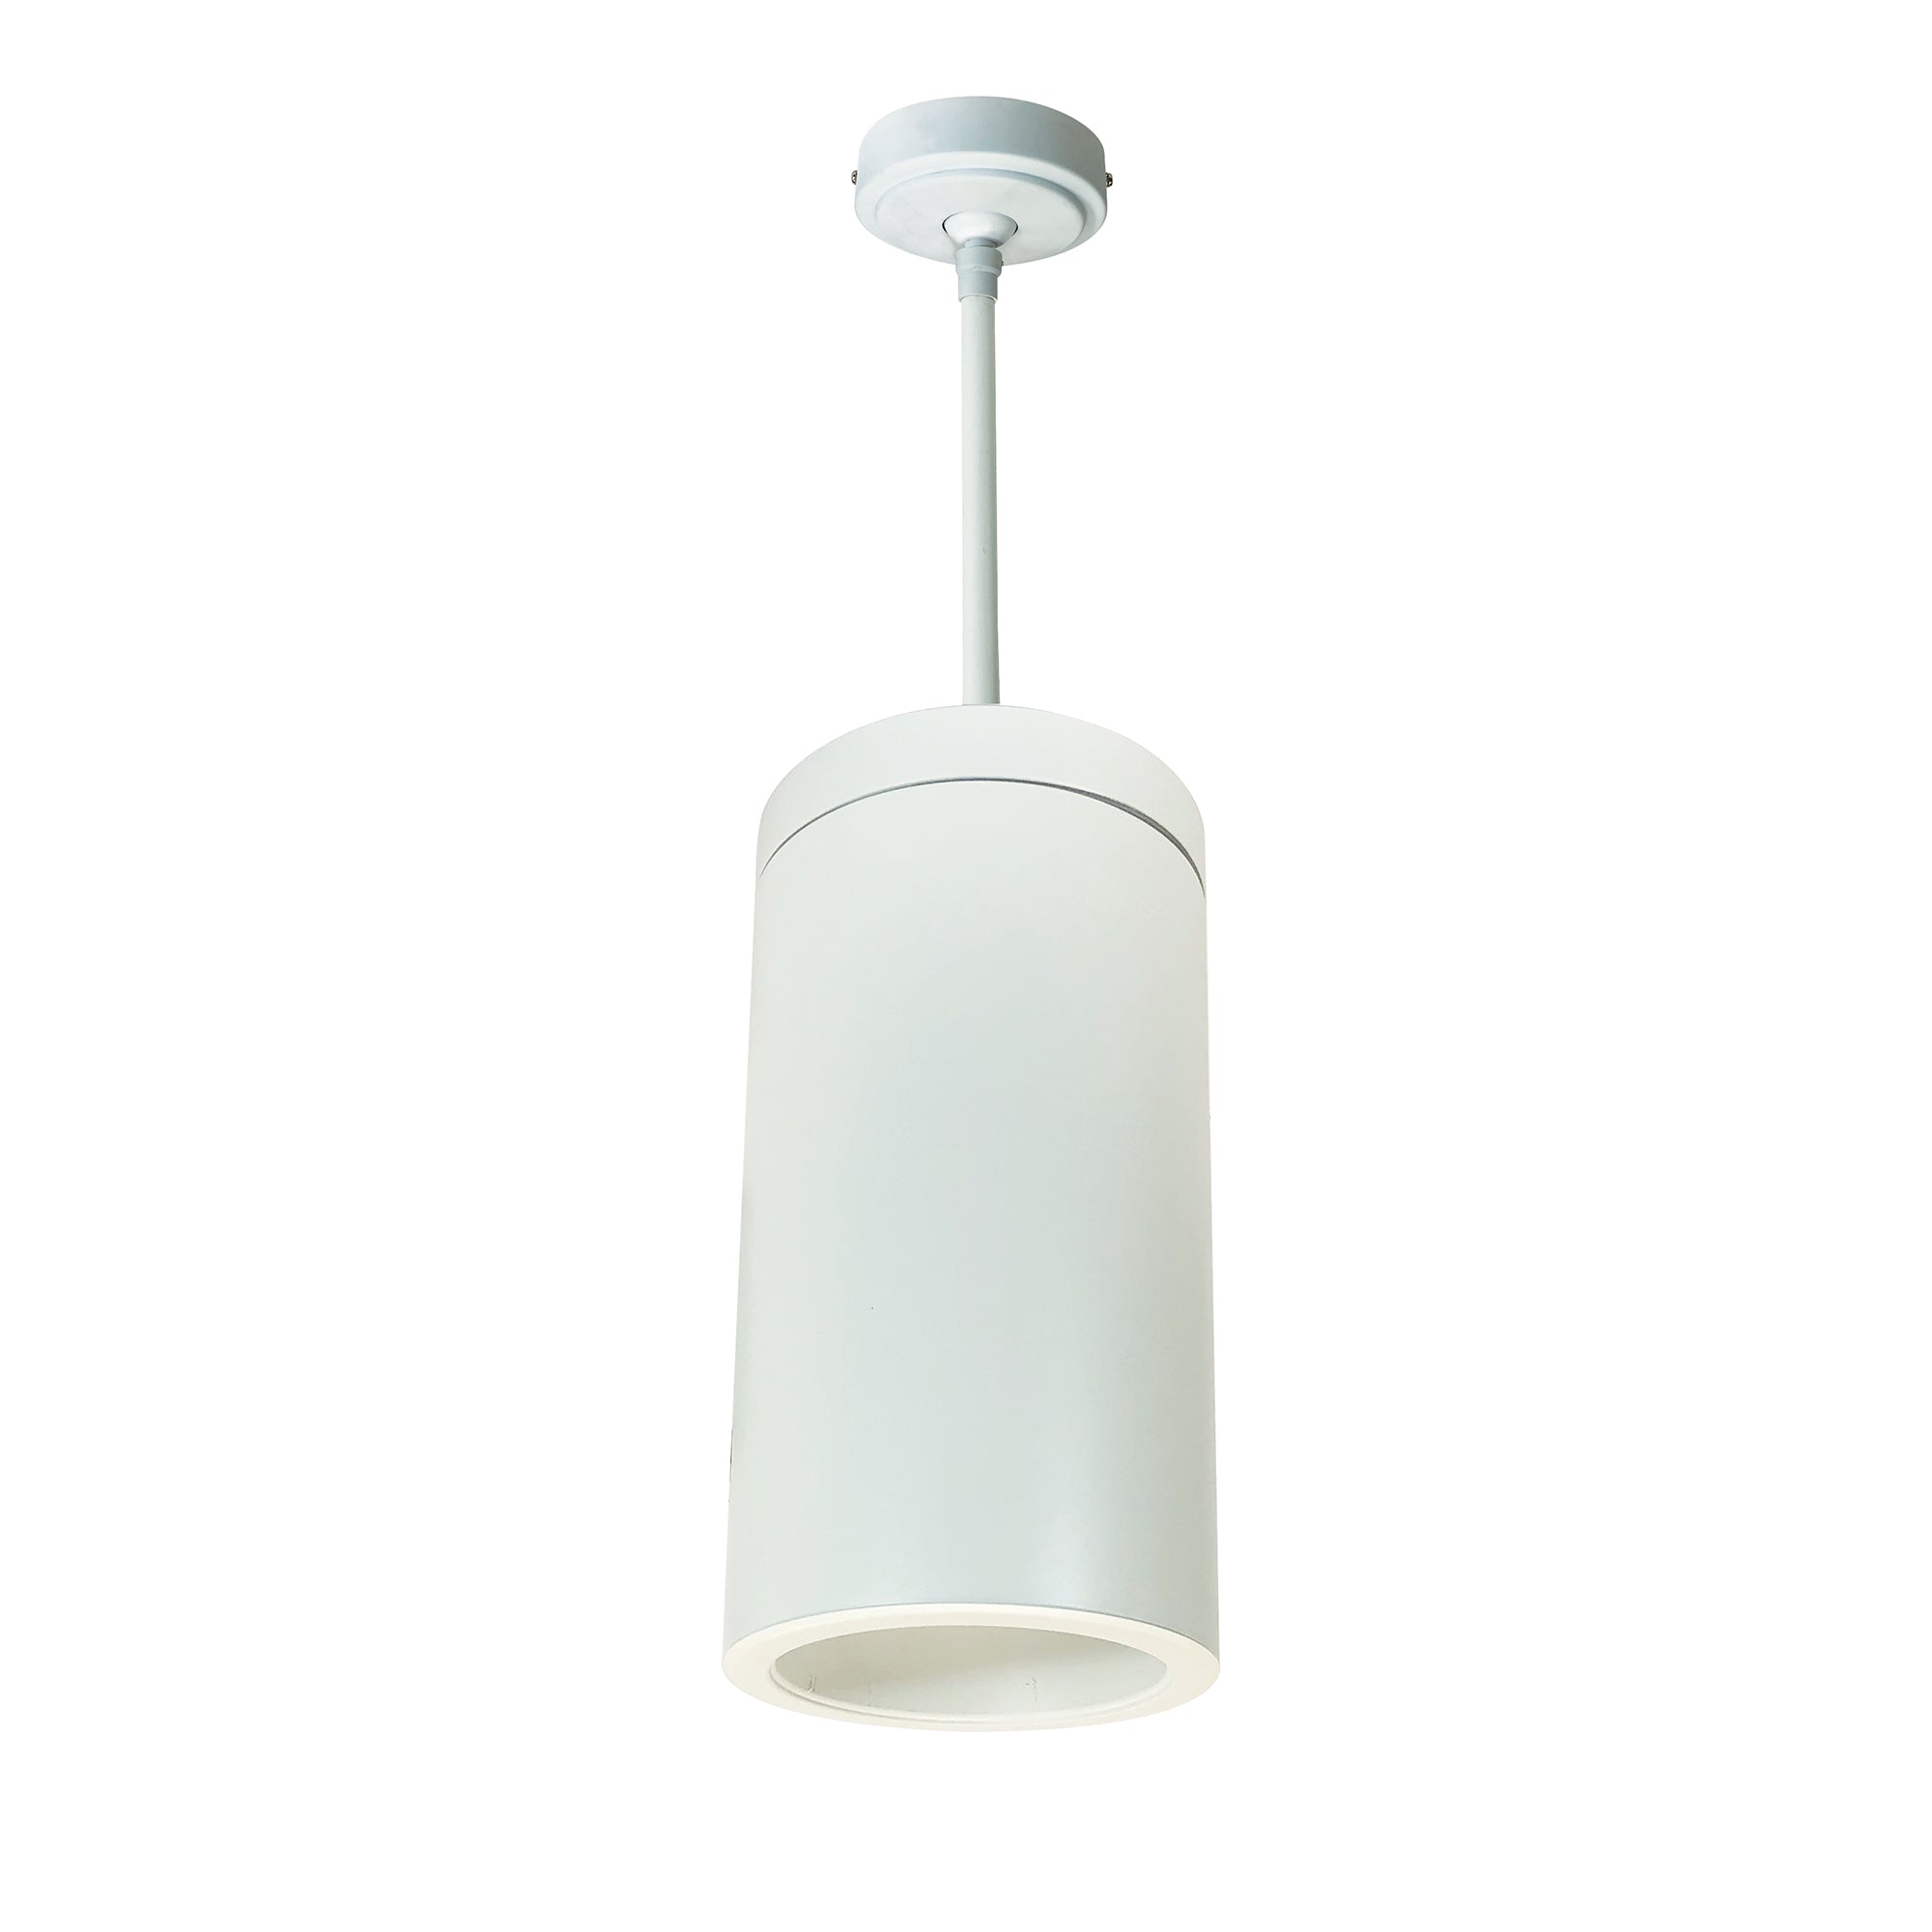 Nora Lighting LE45 - NYLS2-6P25135MWWW6